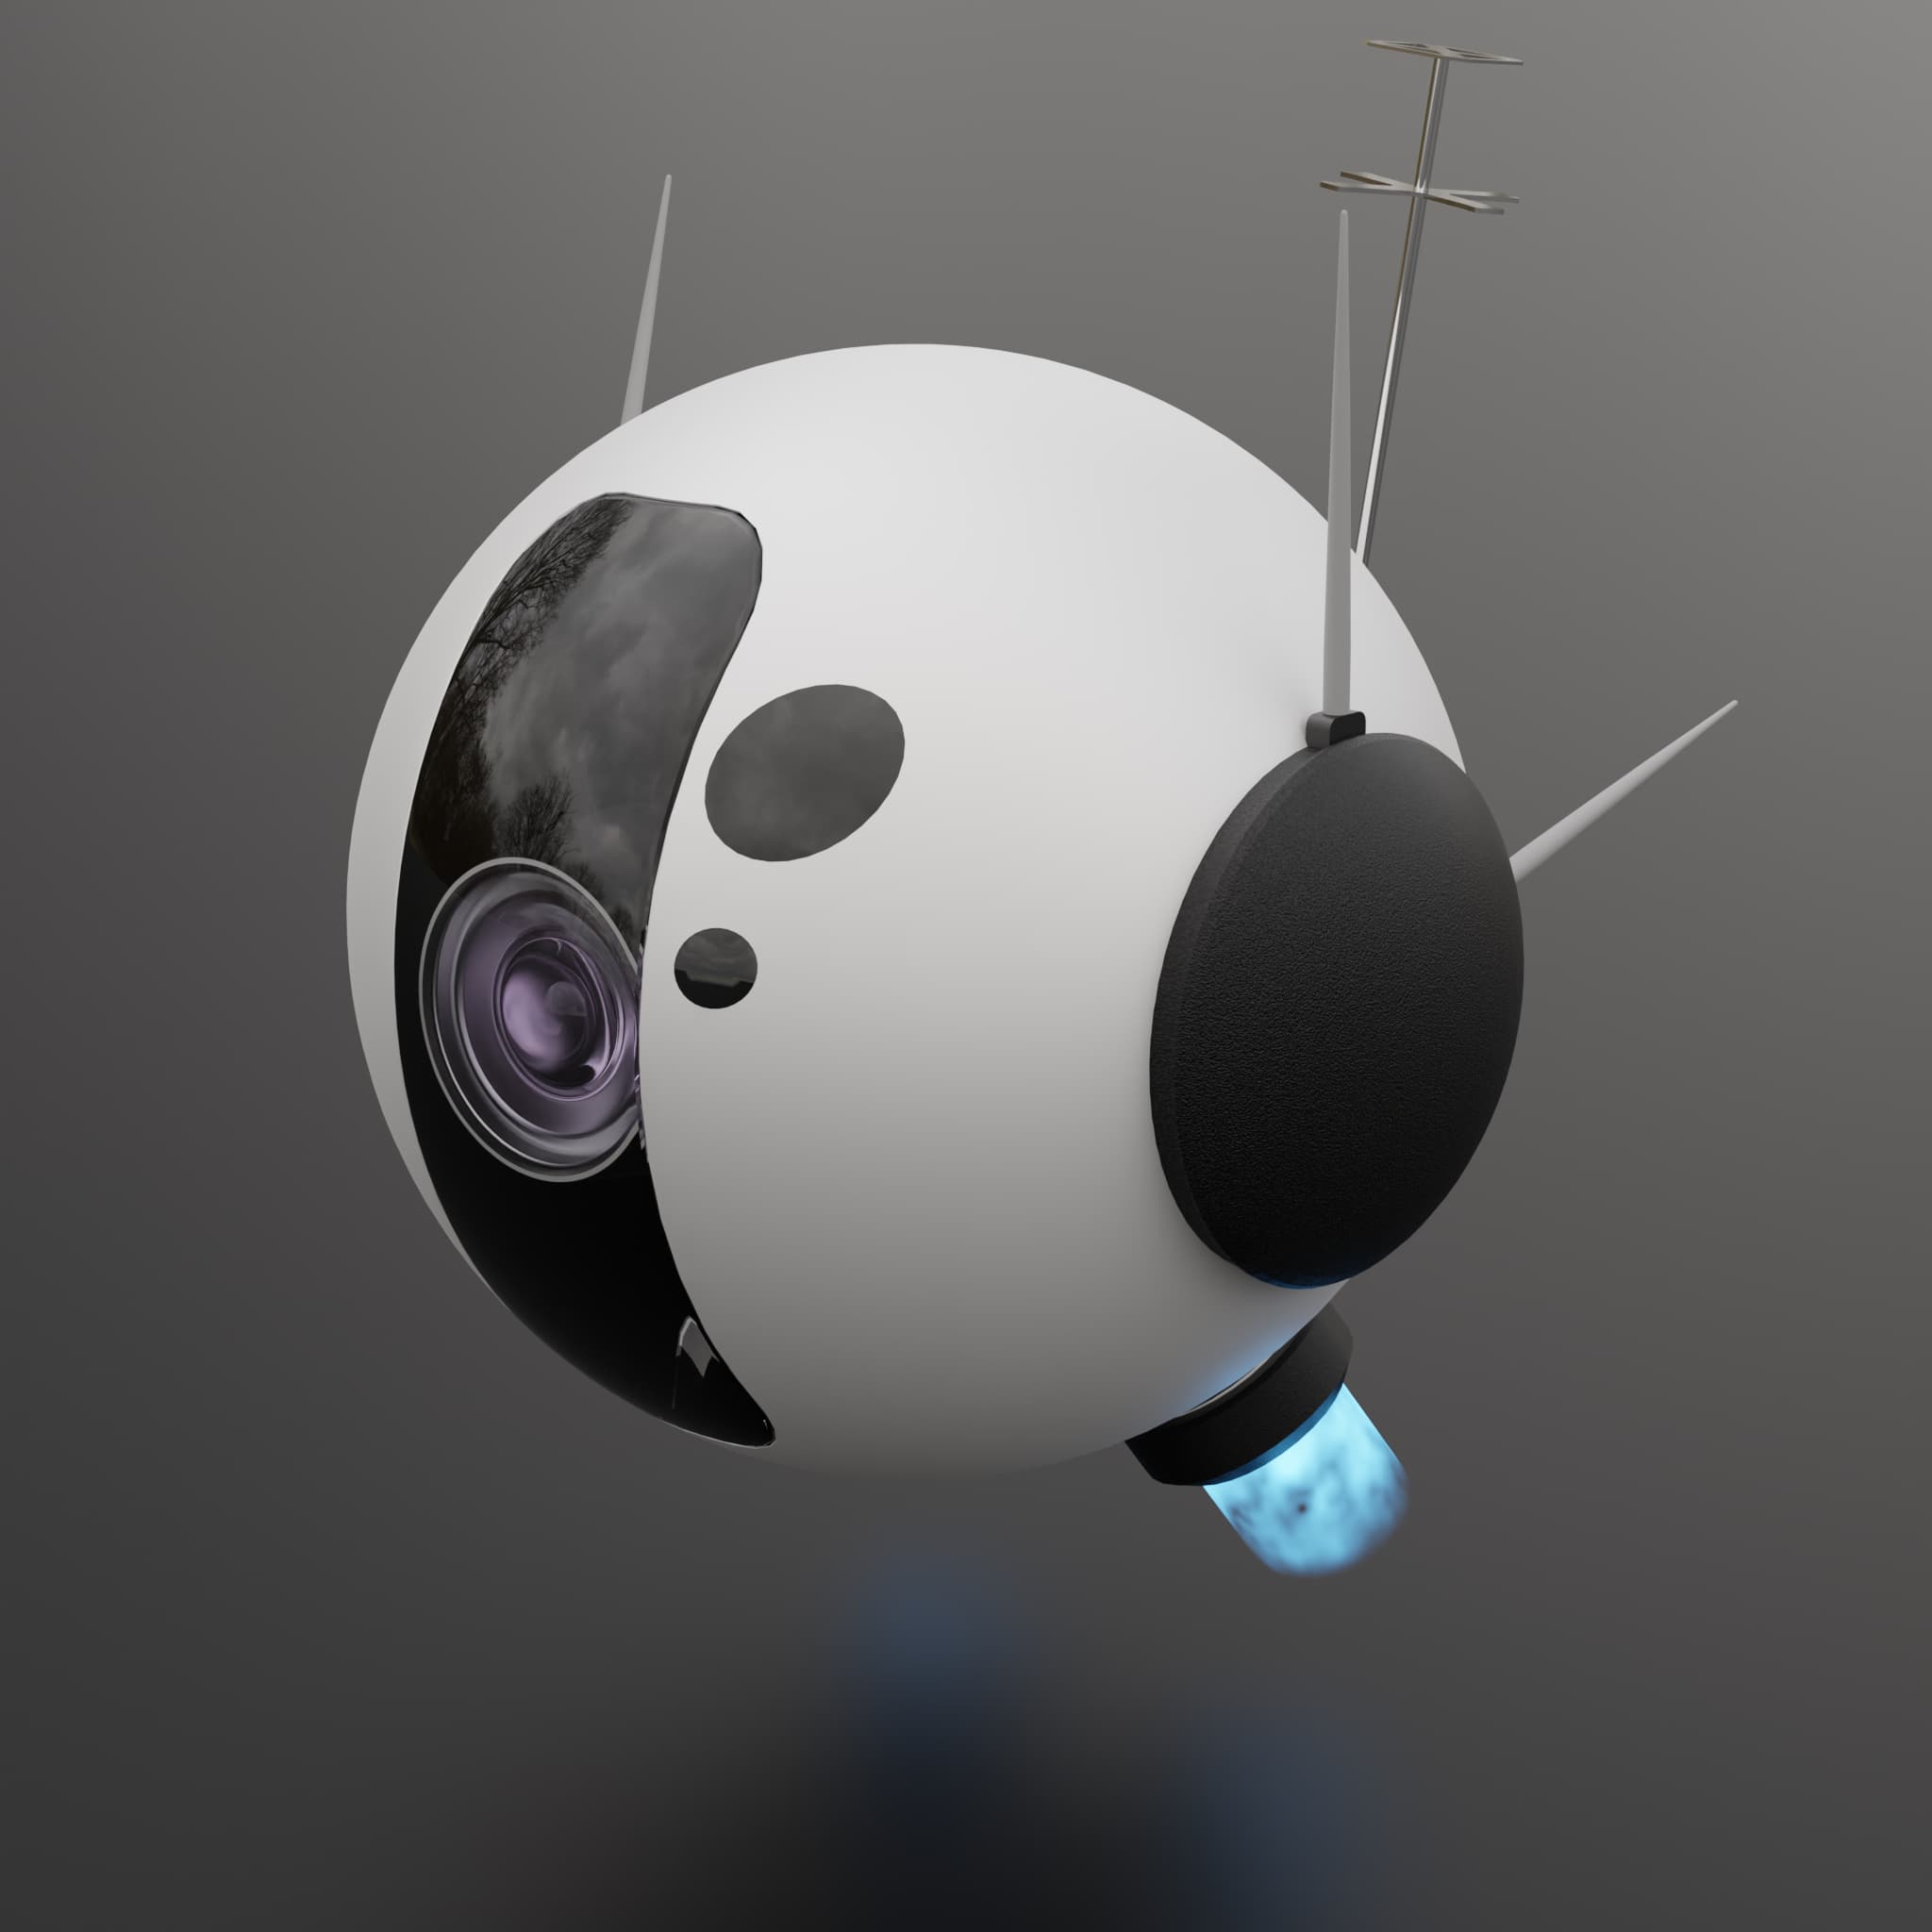 Modelling challenge of a spherical robot.